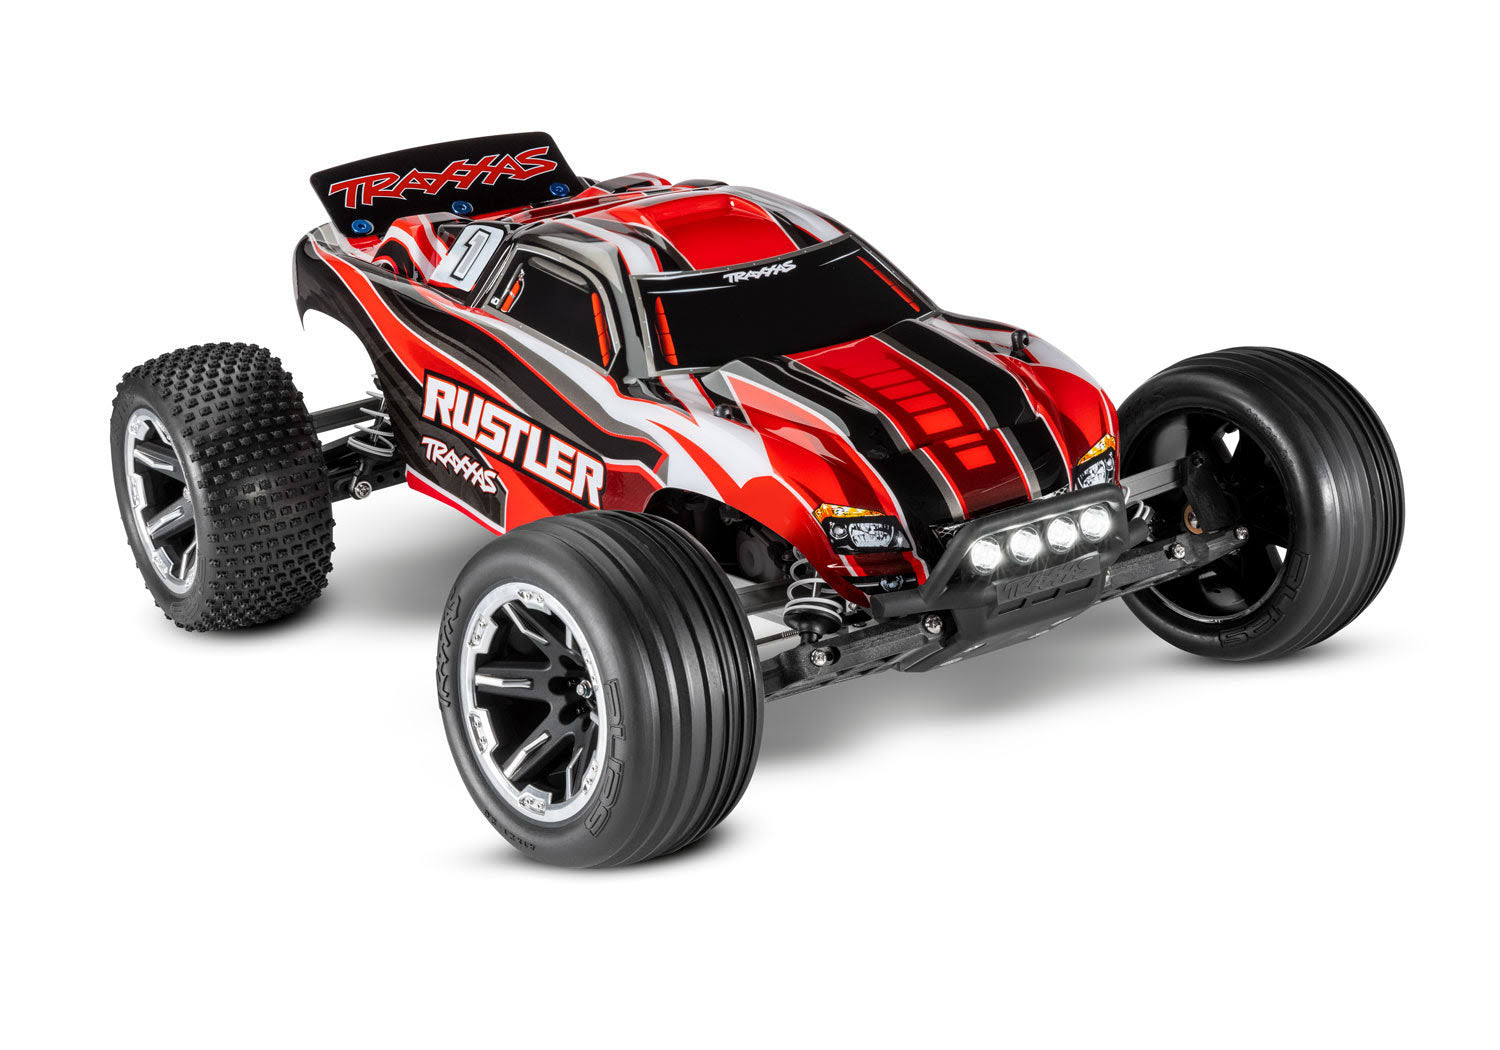 Traxxas Rustler XL-5 RTR Stadium Truck - Red with LED TRX37054-61-RED